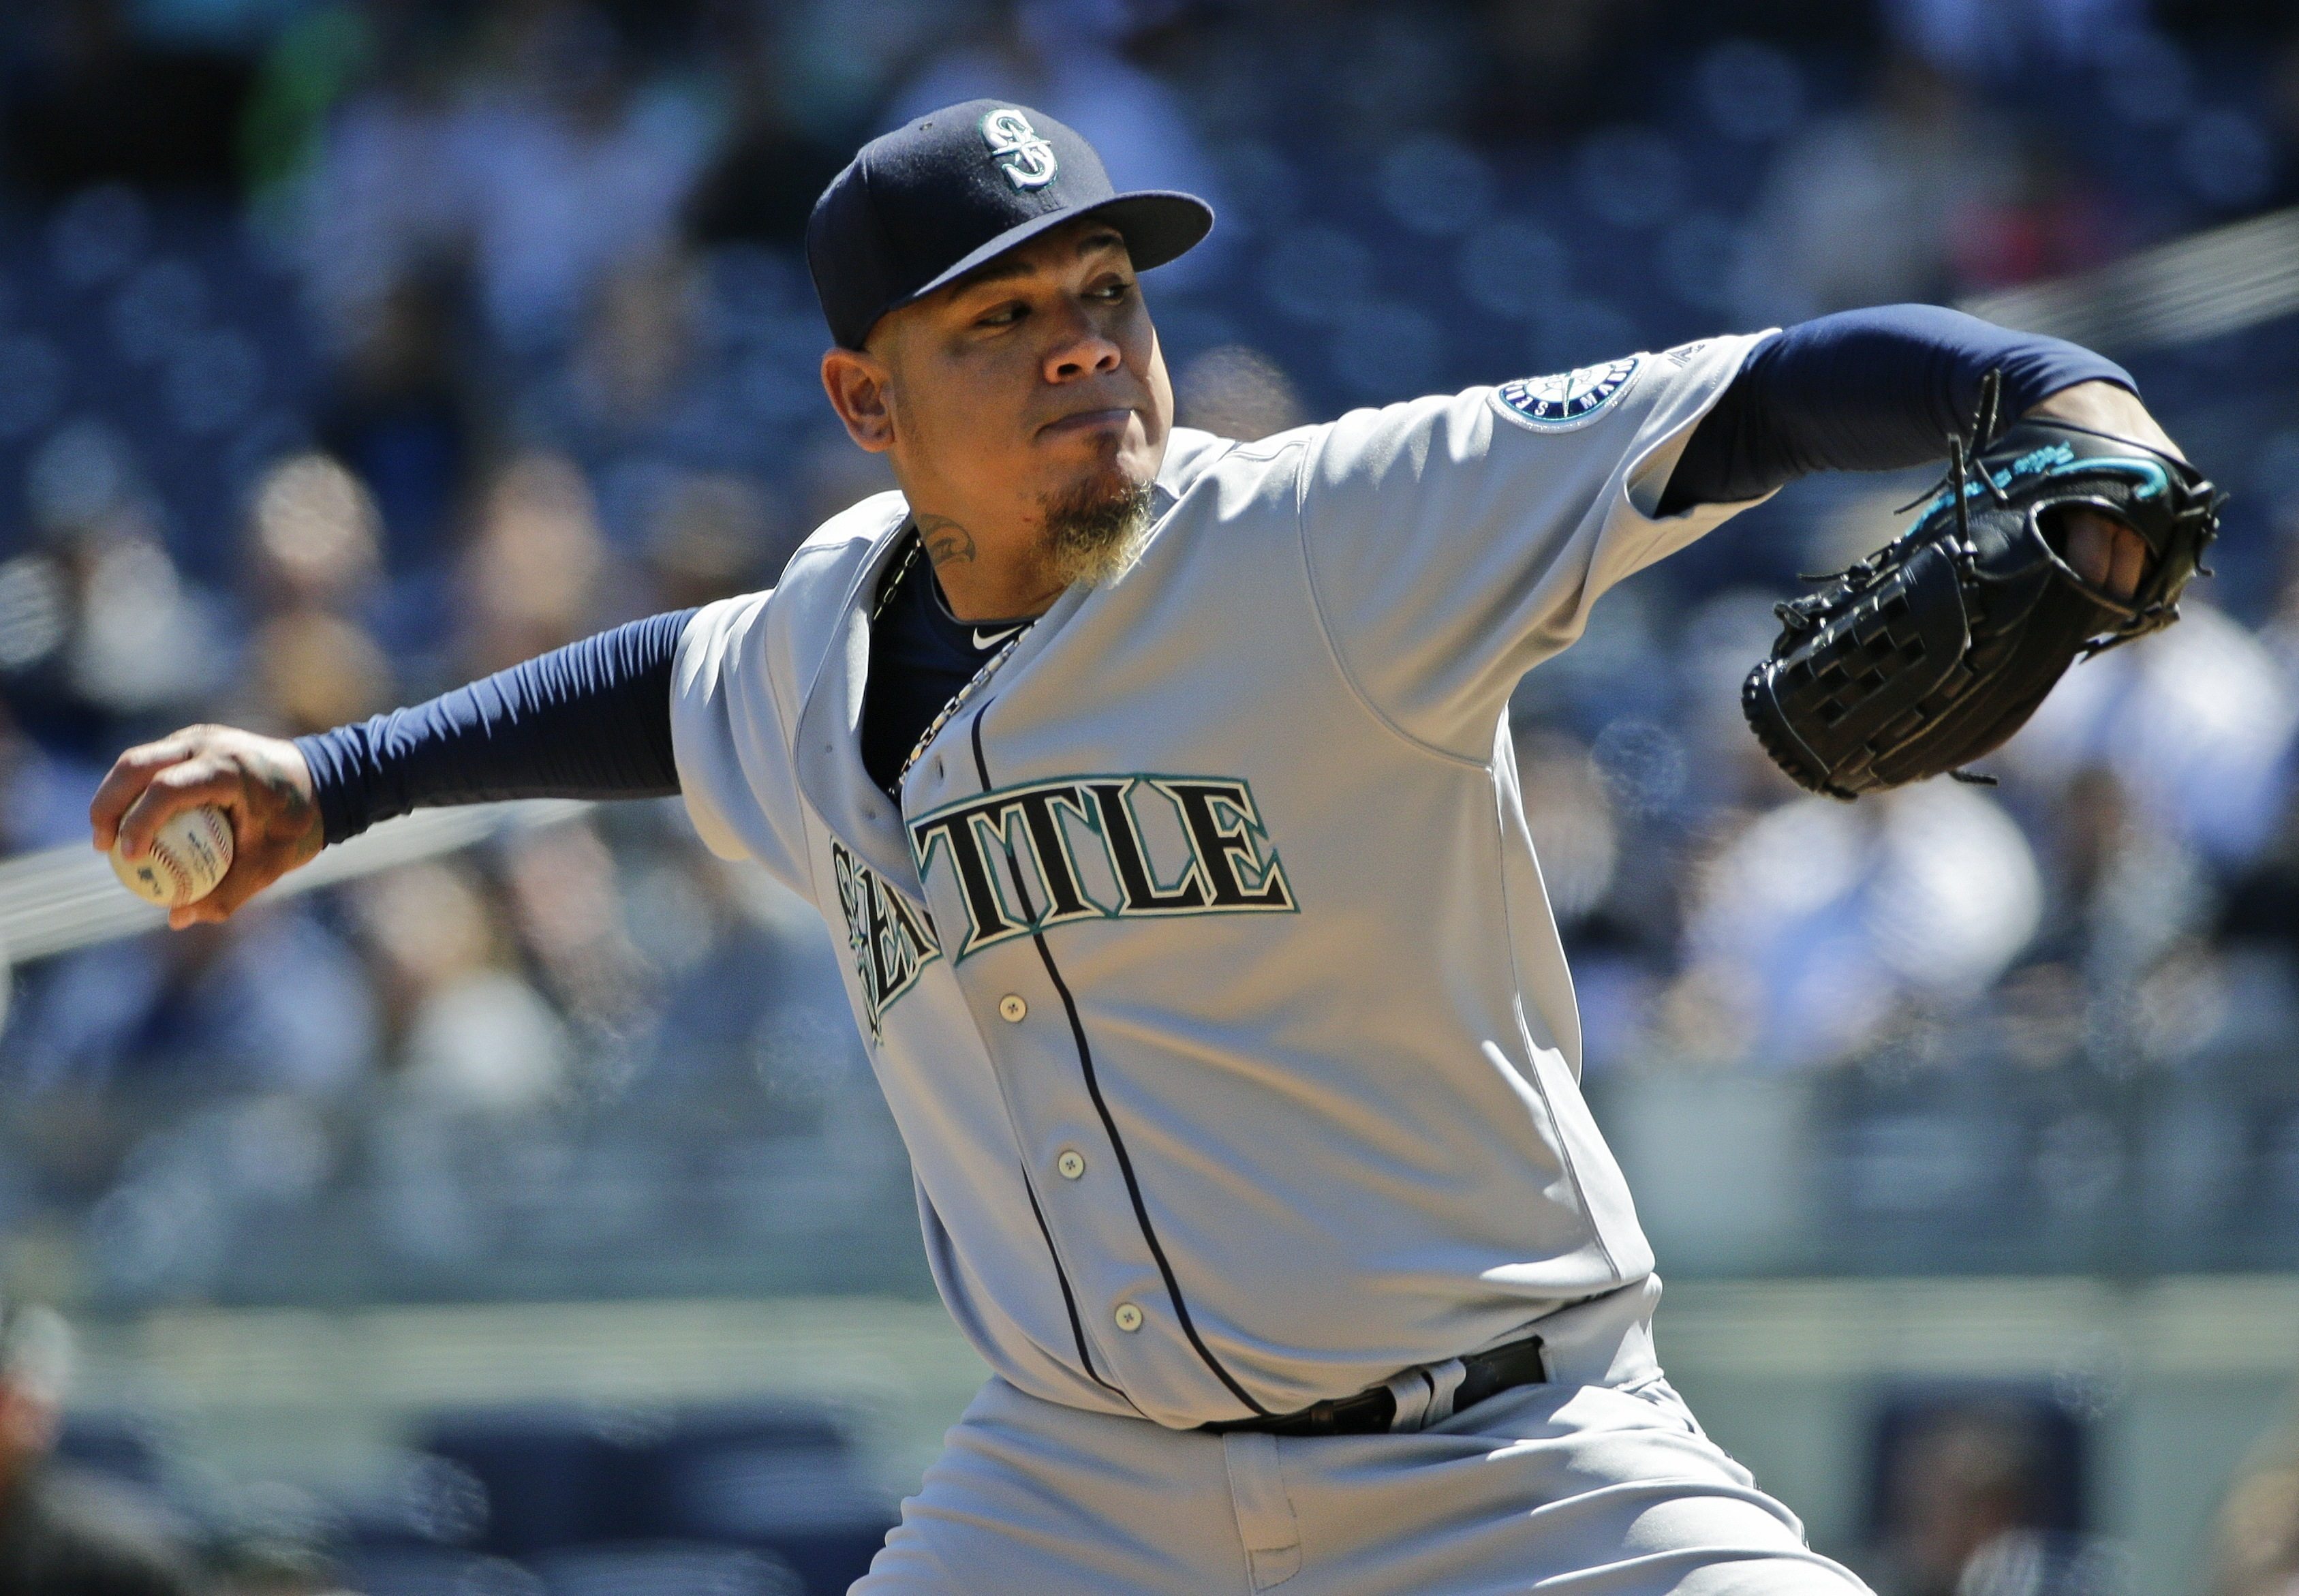 Seattle Mariners' Felix Hernandez delivers a pitch during the first inning of a baseball game against the New York Yankees Saturday, April 16, 2016, in New York.